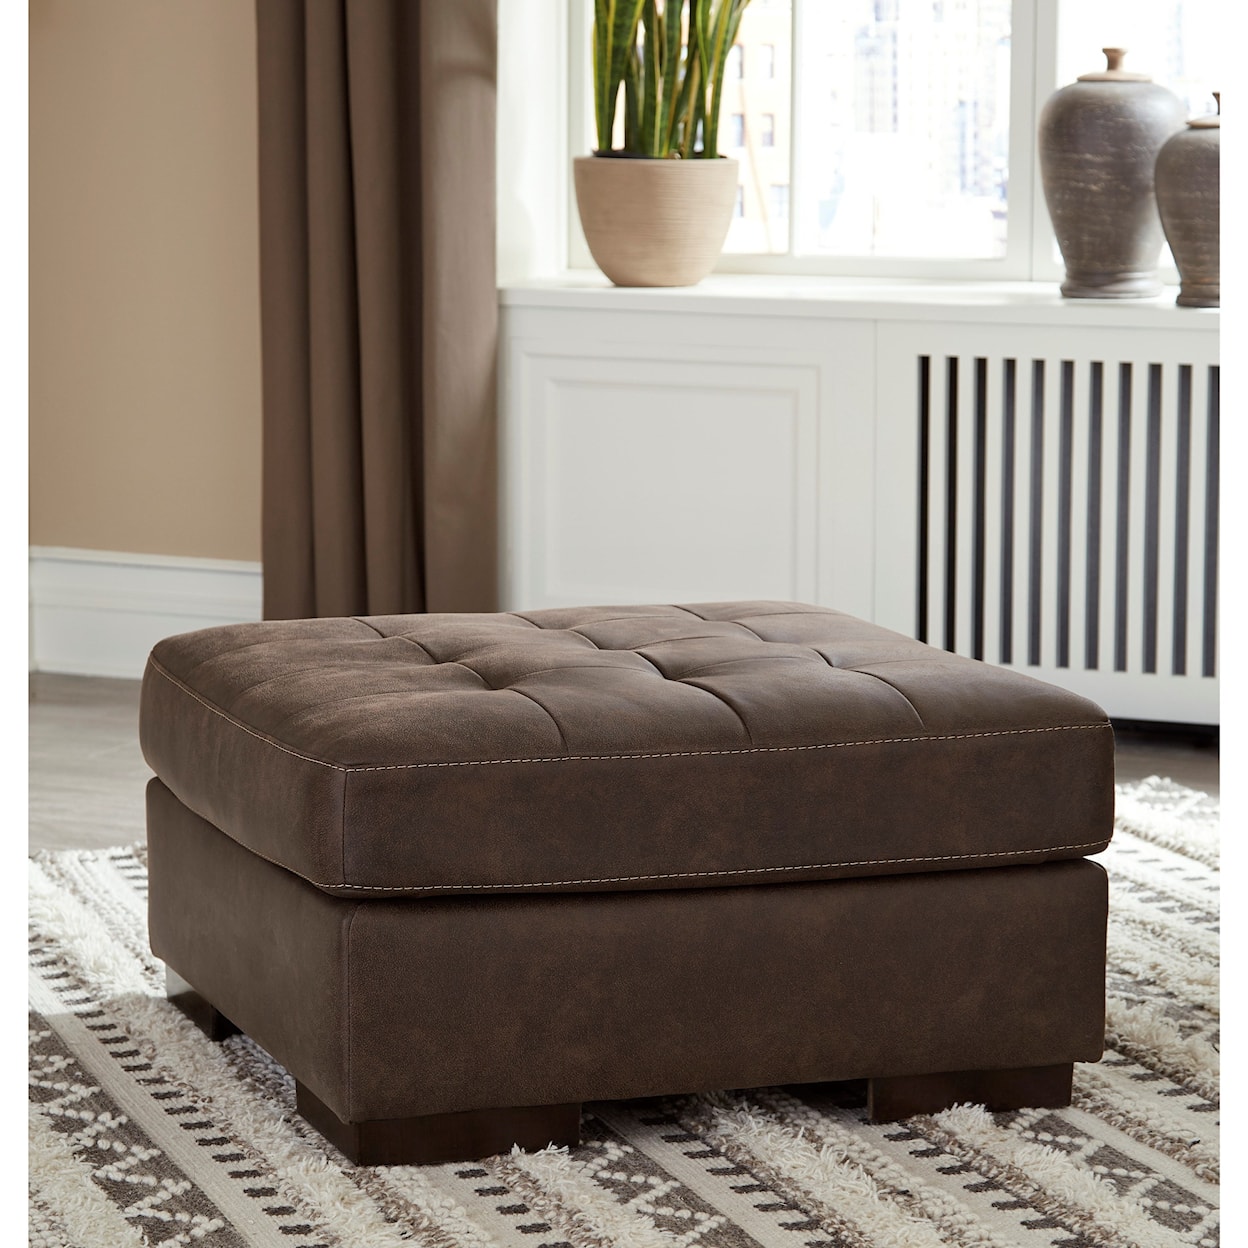 Signature Design by Ashley Furniture Maderla Oversized Accent Ottoman